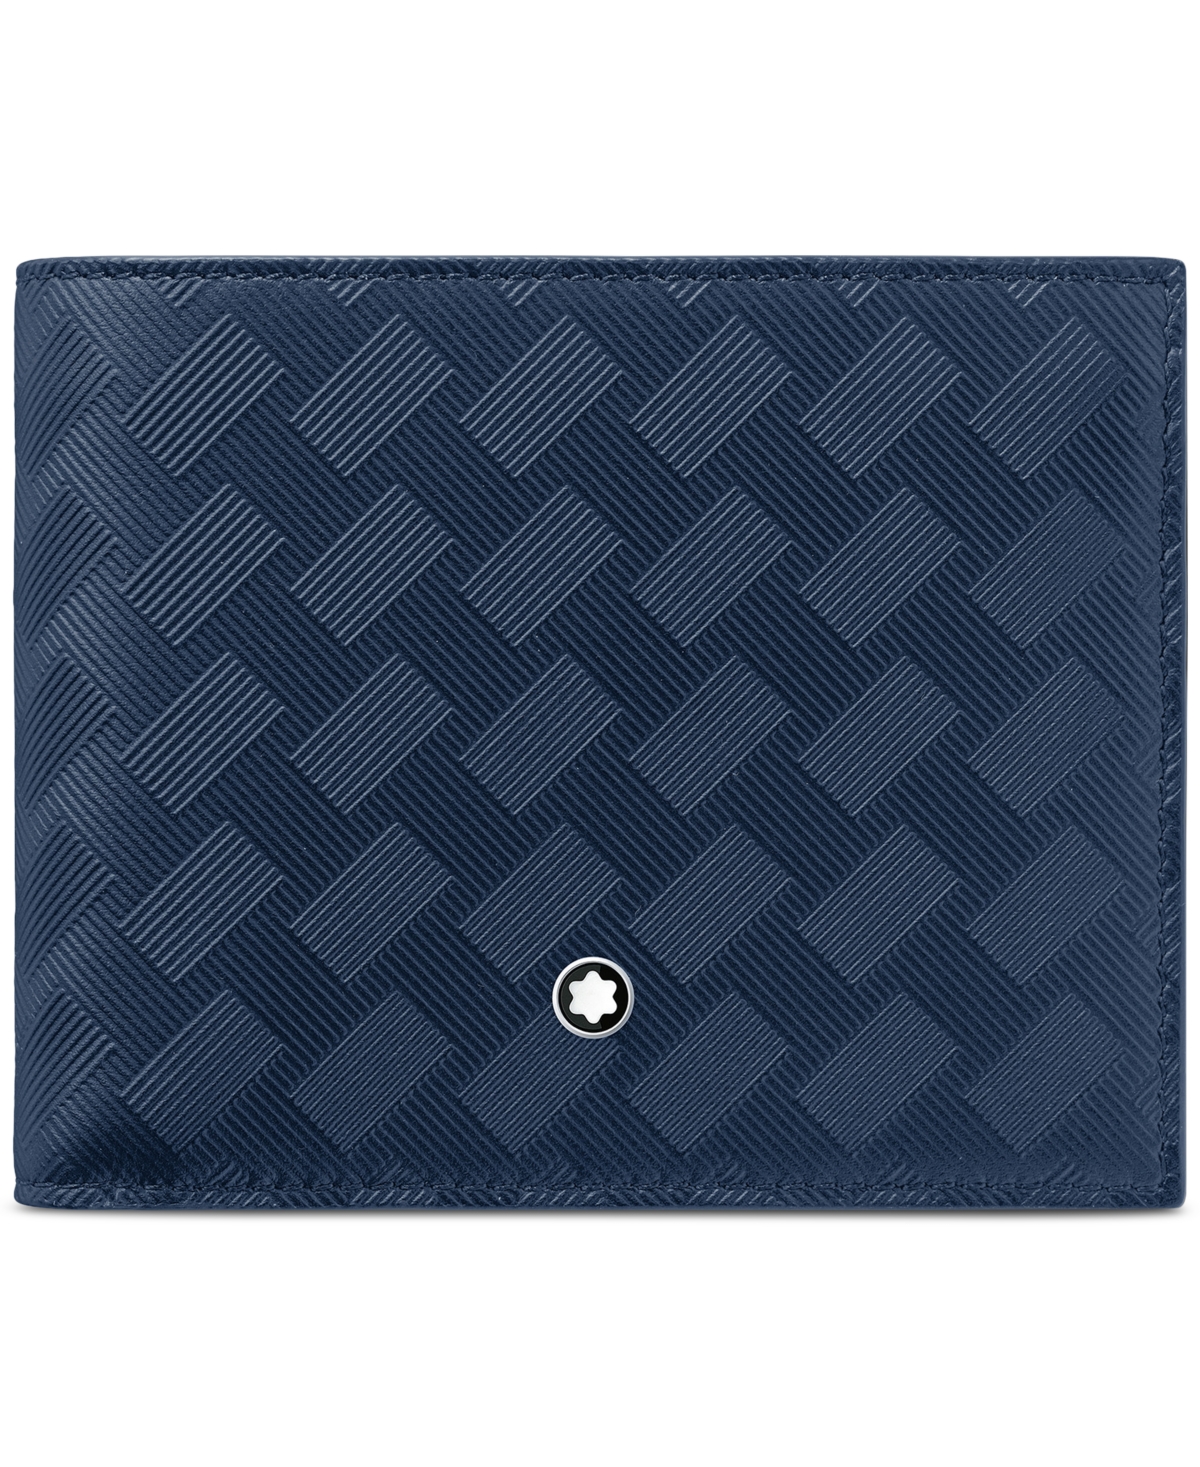 Montblanc Extreme 3.0 Leather Wallet In Blue